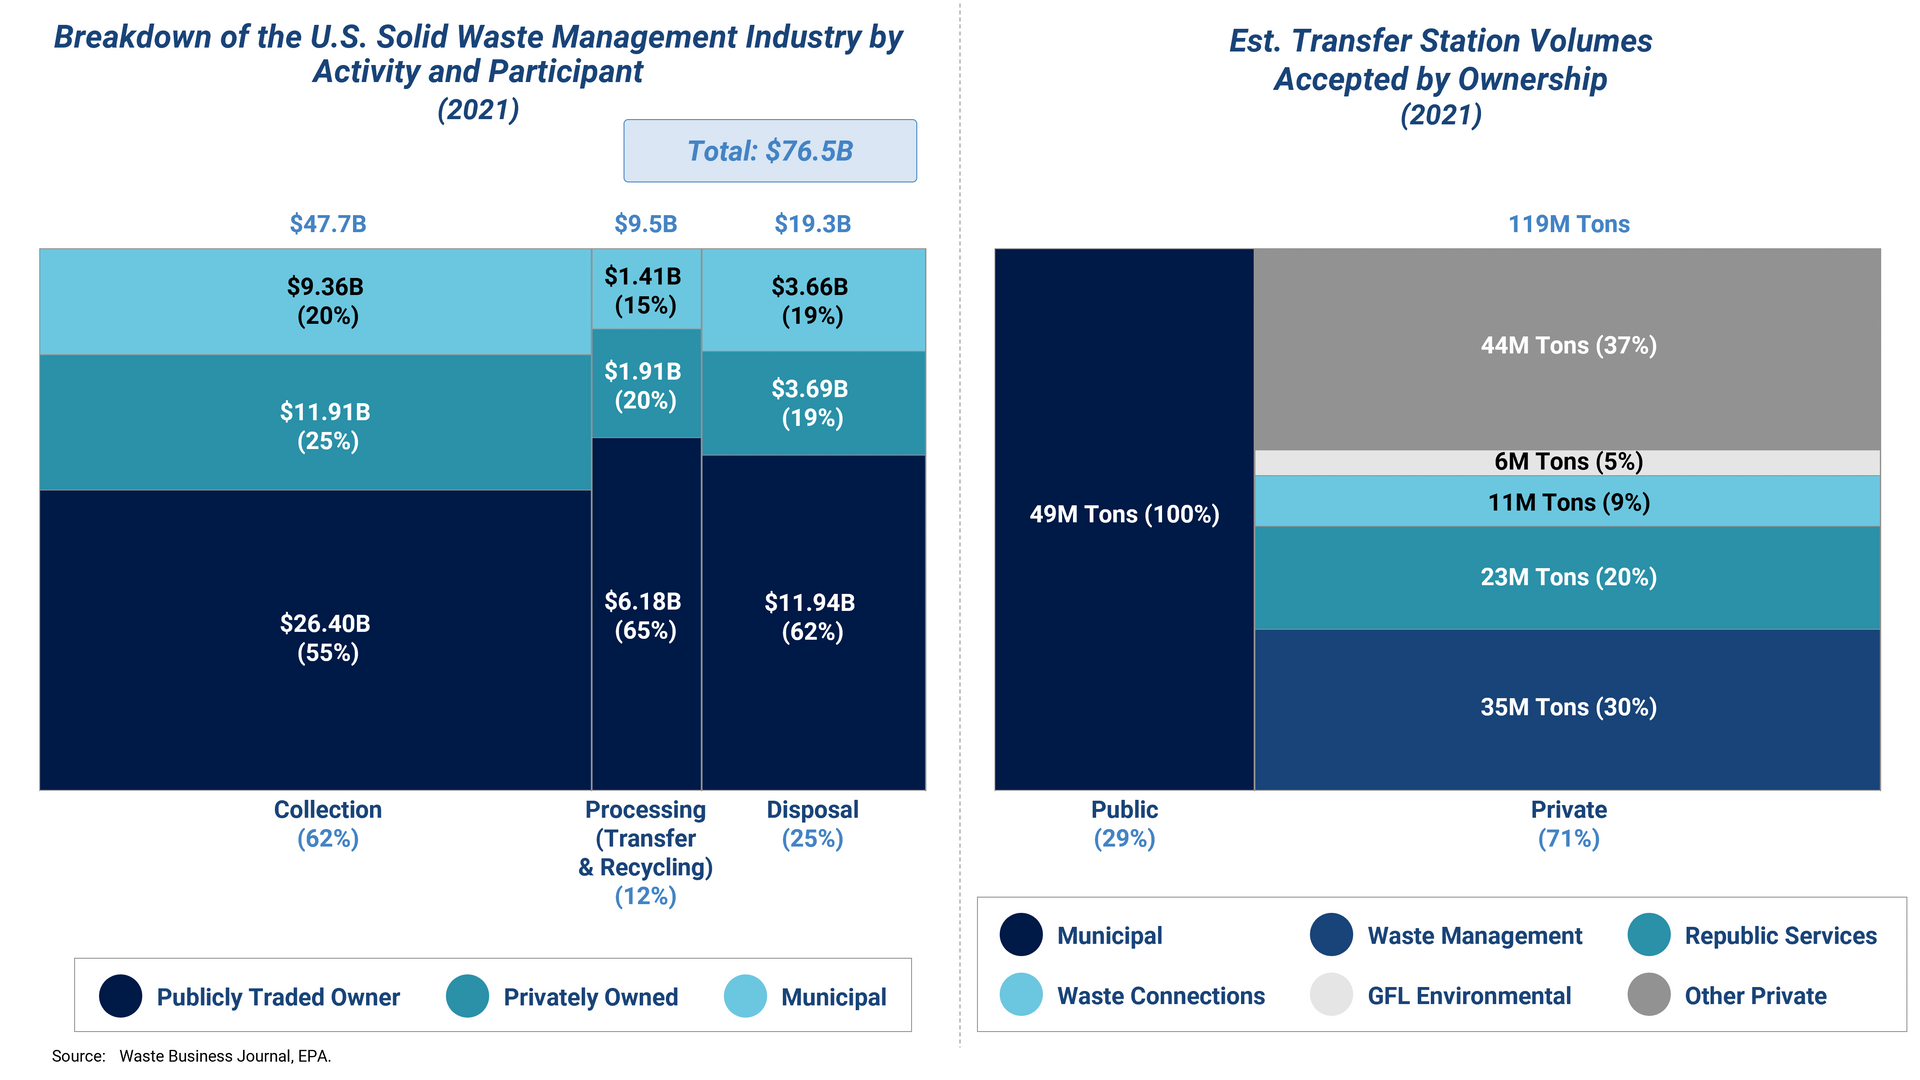 Two graphs displaying both a breakdown of the U.S. solid waste management industry by activity and participant, as well as the estimated transfer volumes accepted by ownership. 